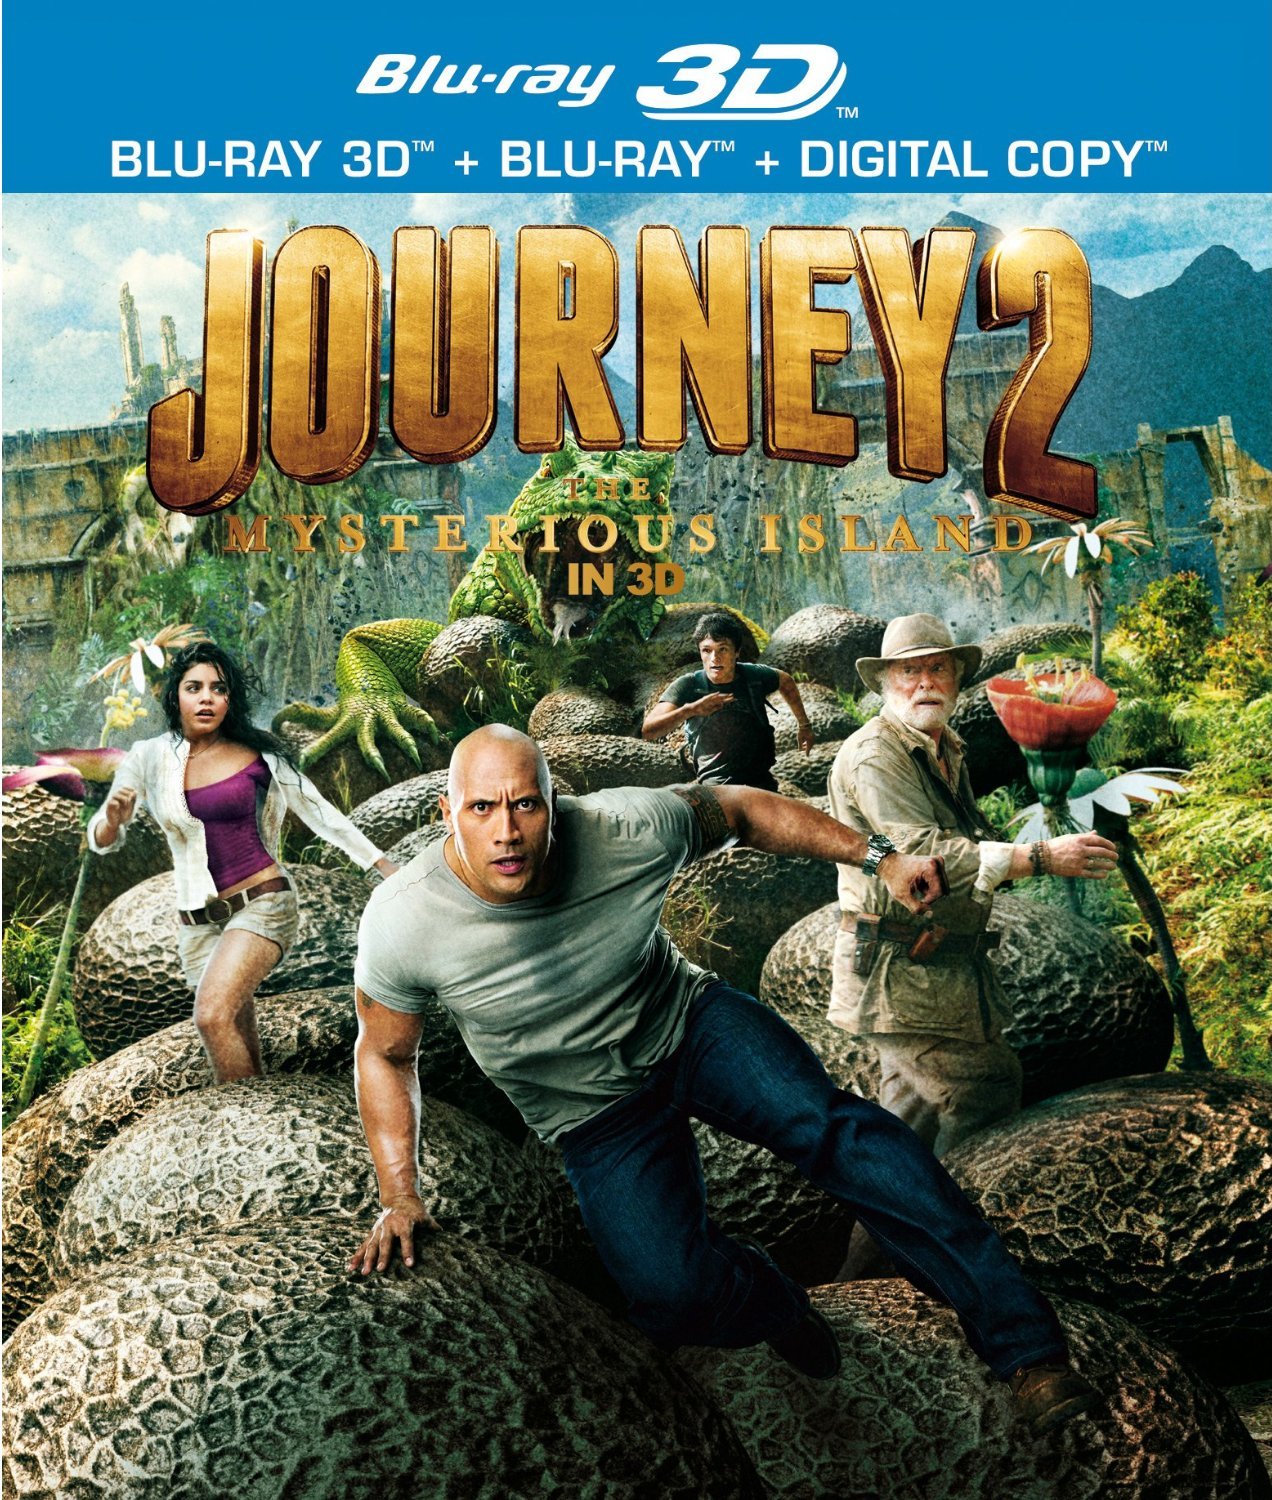 Every Thing: JOURNEY 2 THE MYSTERIOUS ISLAND (2012)